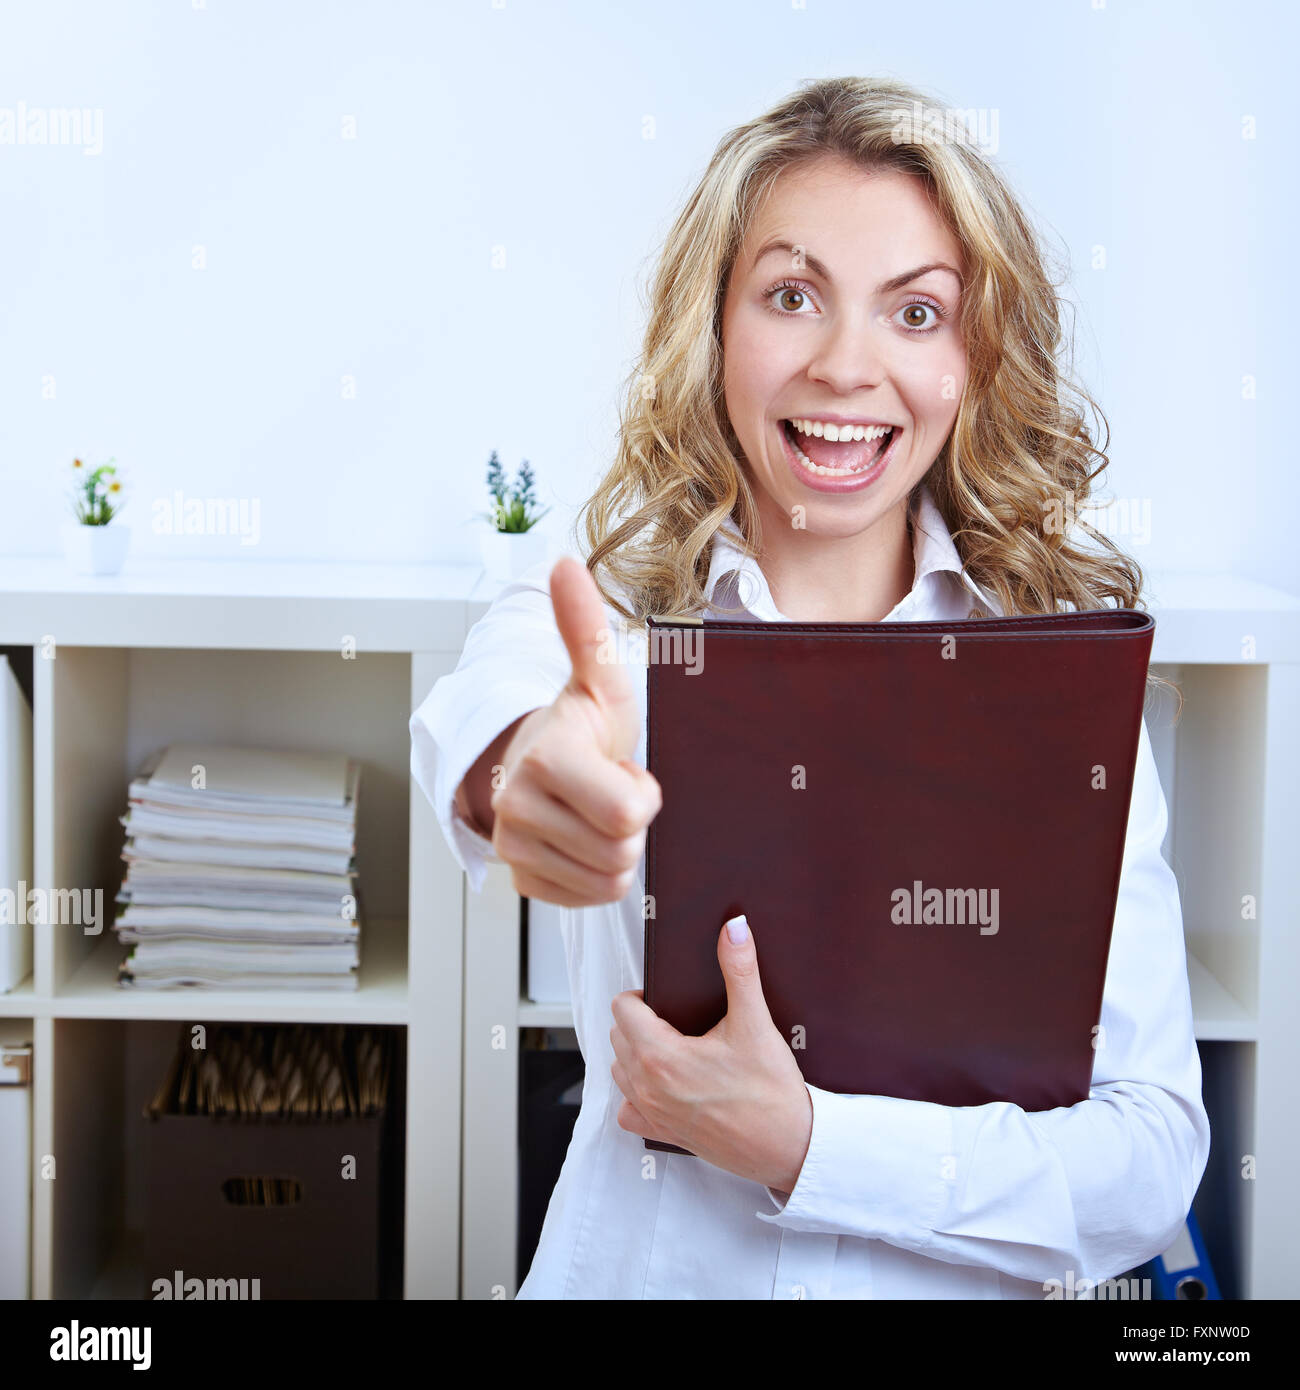 Female happy job candidate with CV holding her thumbs up Stock Photo